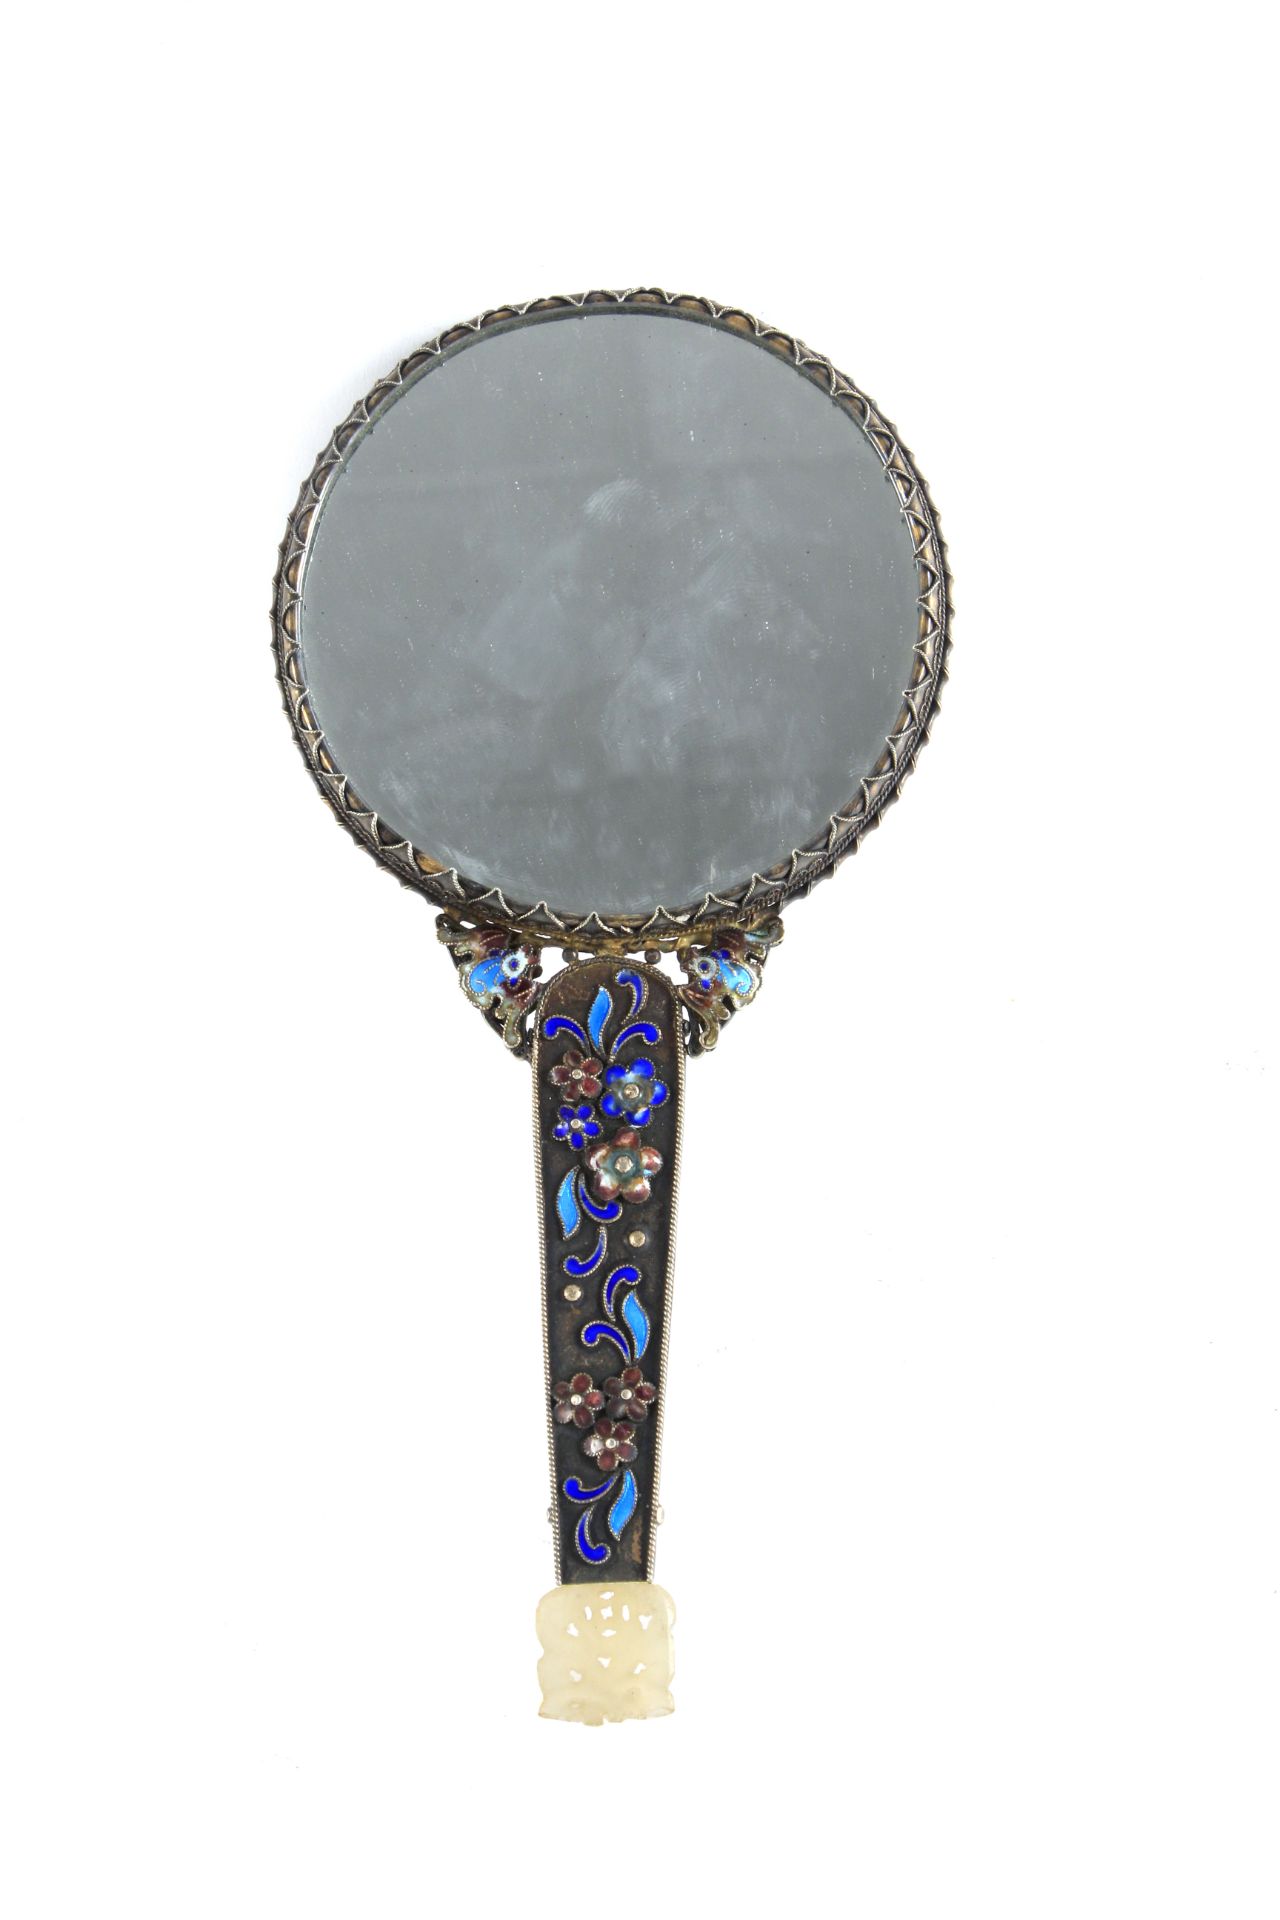 A Chinese silver filigree mirror circa 1950 with embossed jade medallions and enamels